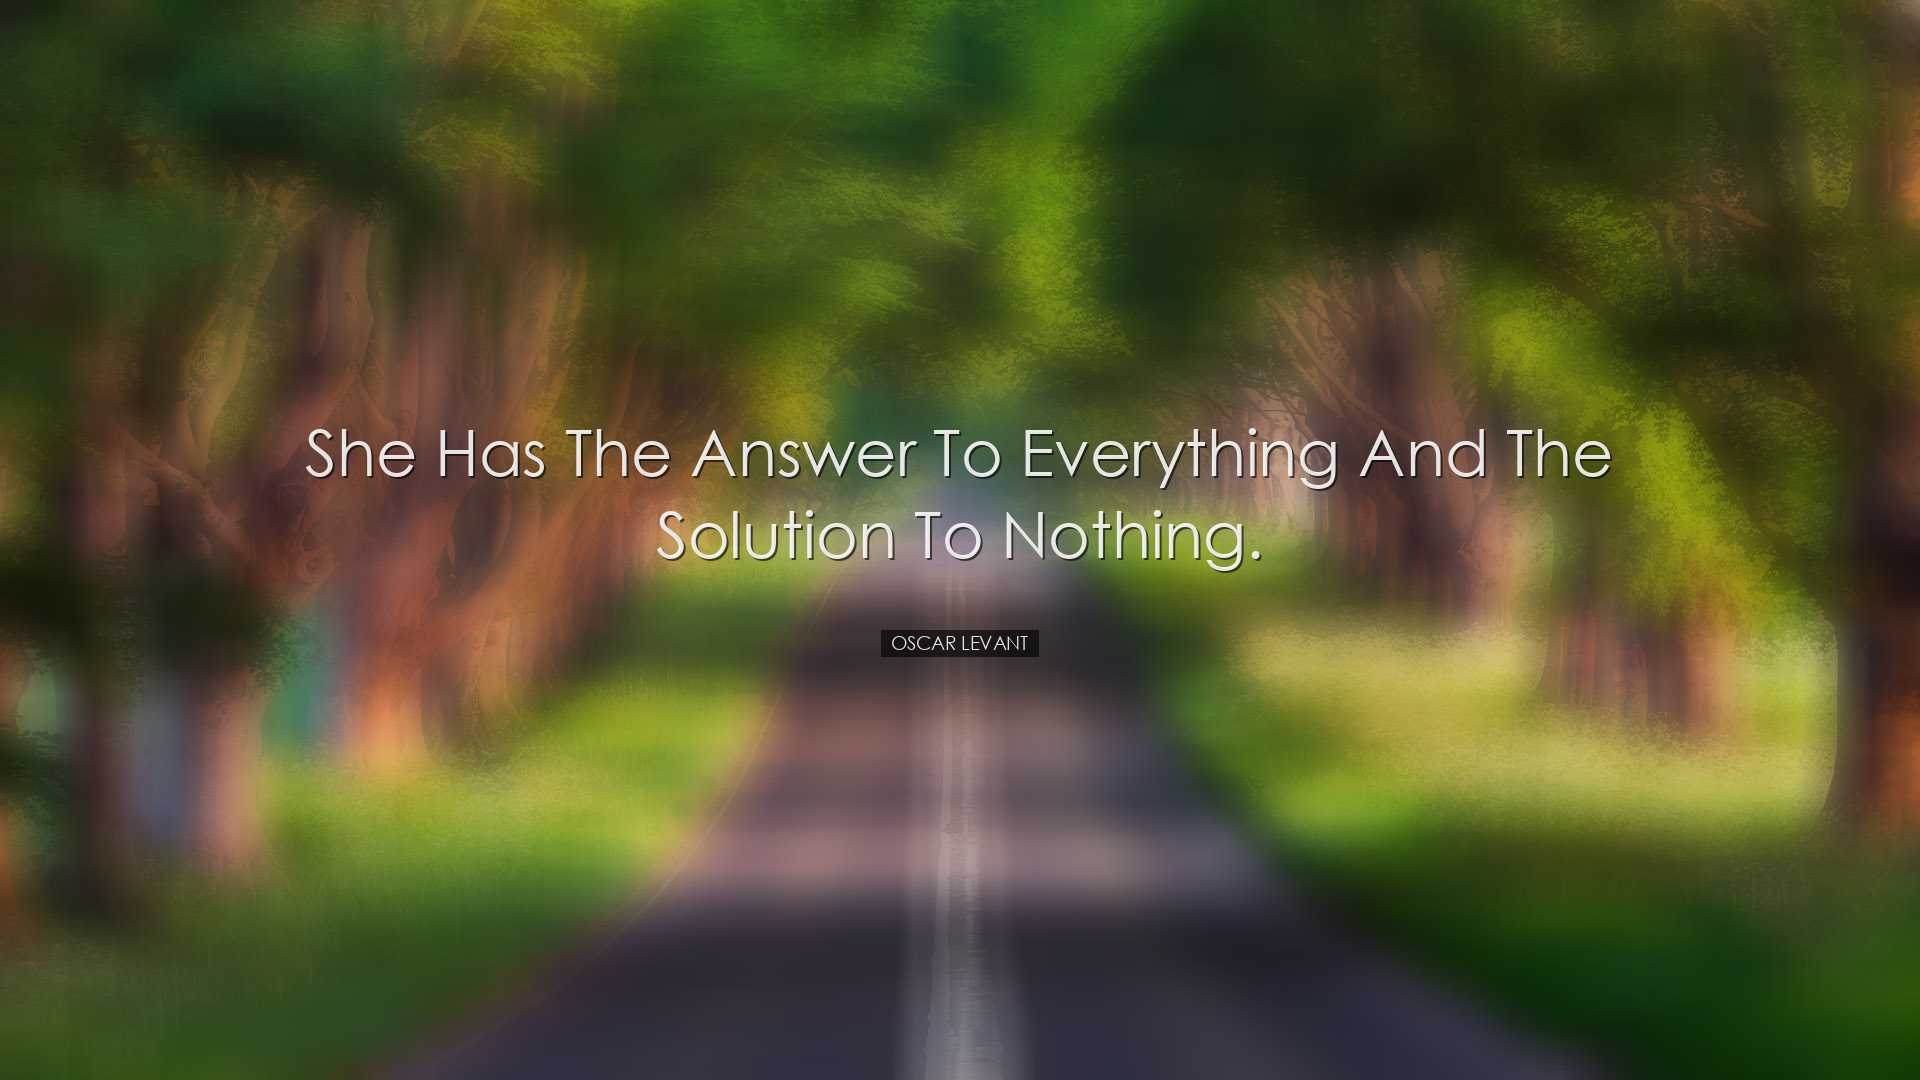 She has the answer to everything and the solution to nothing. - Os